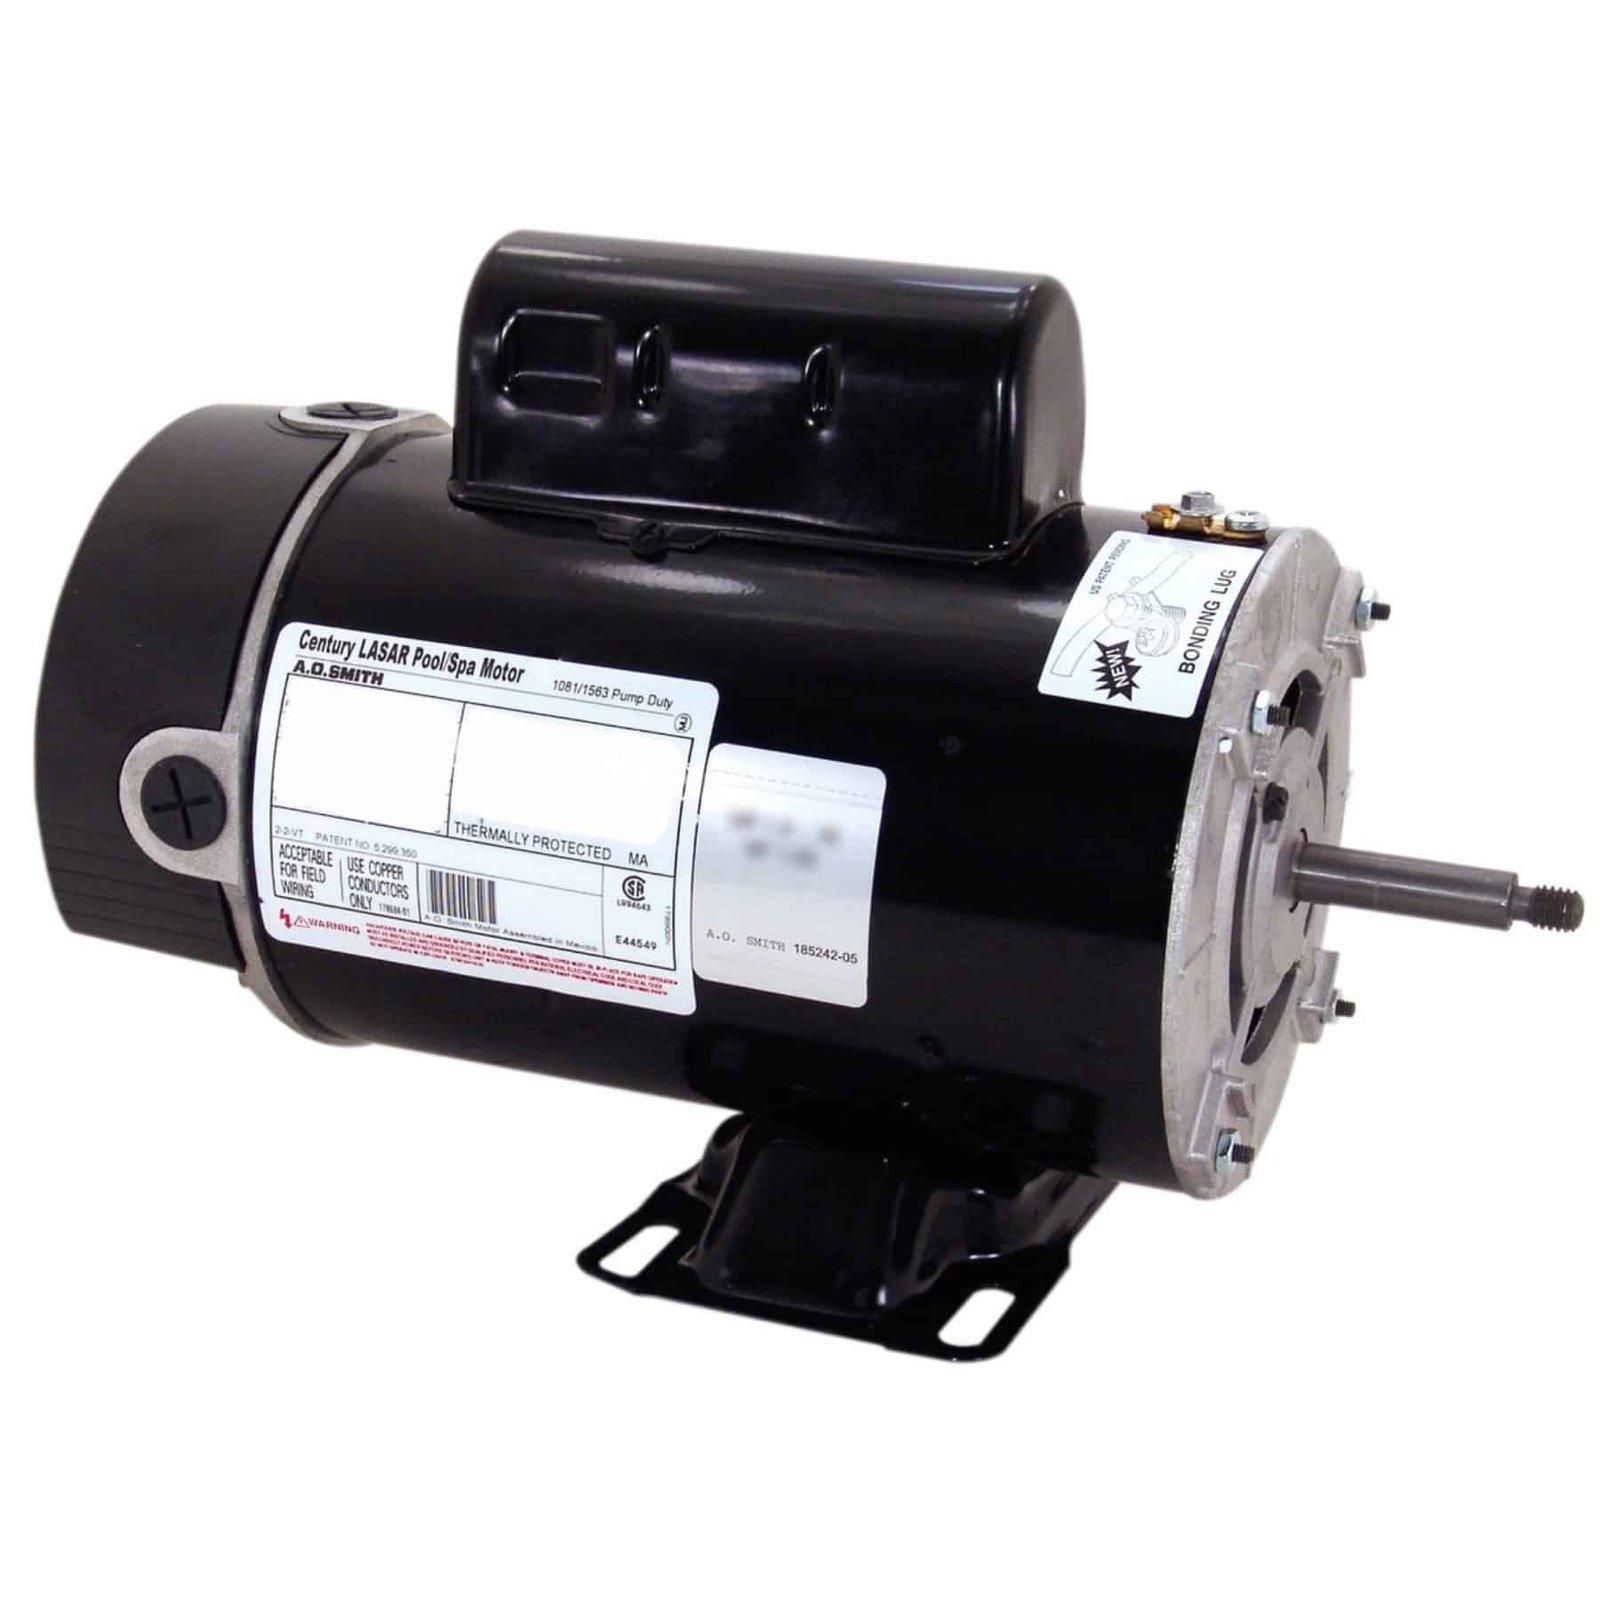 Replacement Motor, 1.0 HP, C-Frame, Threaded Shaft Two Speed, Single Phase, 1.0 SF, (BN37V1)